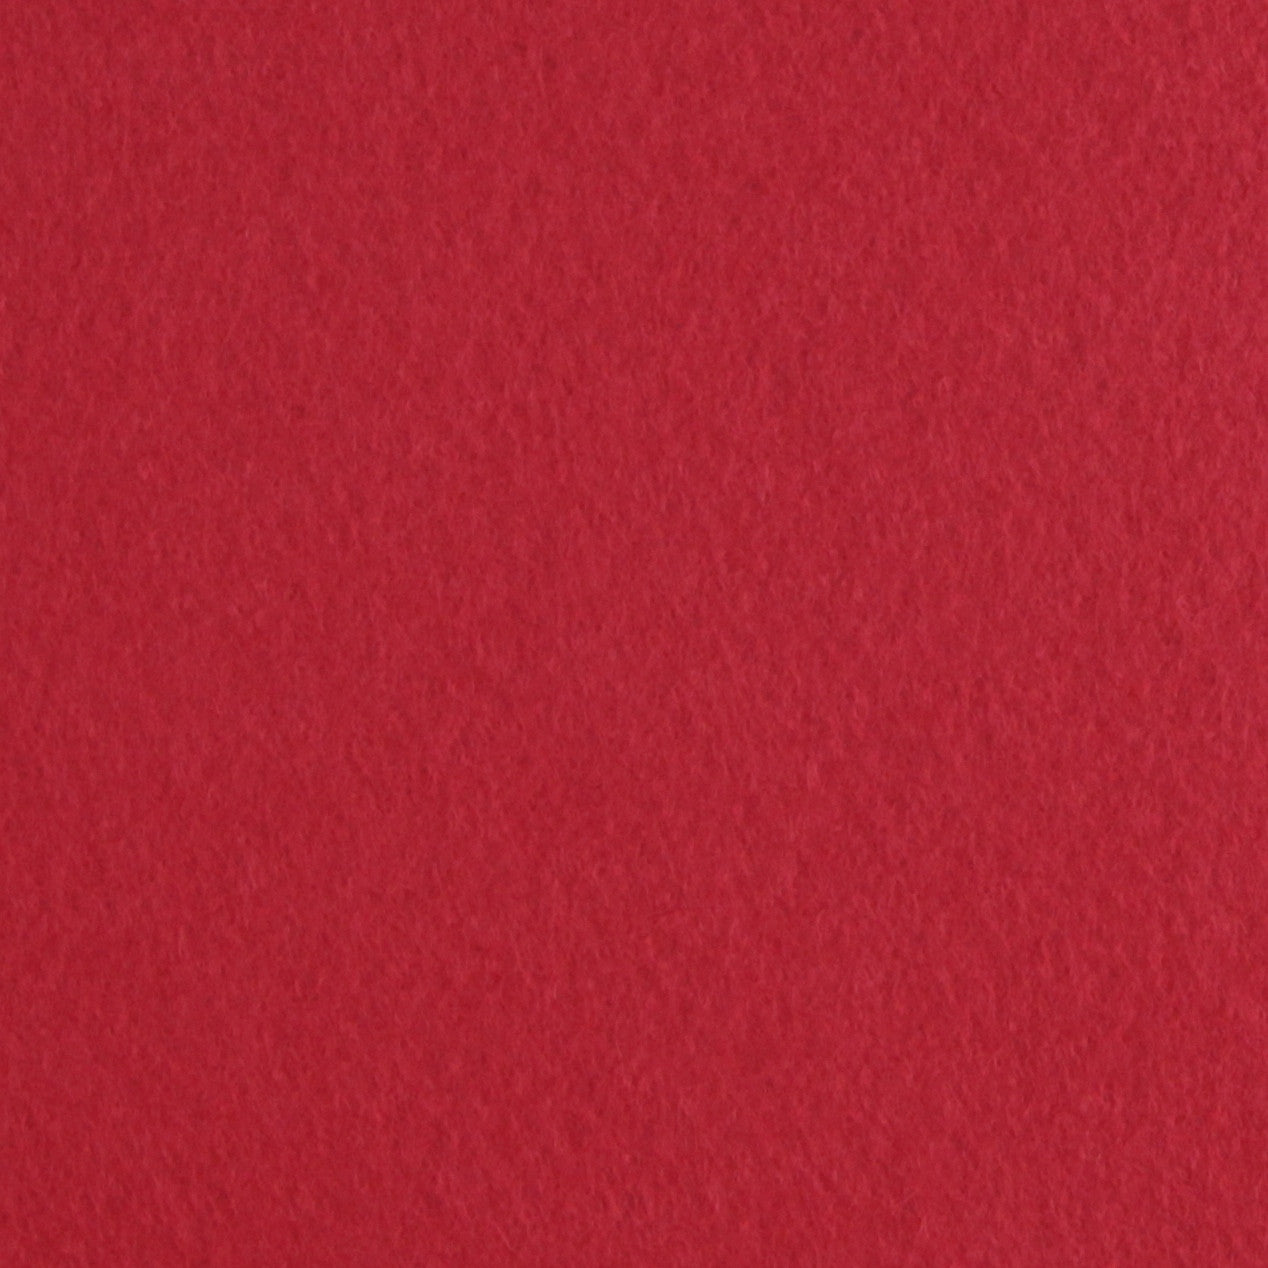 9 x 12 Inch Ruby Red Felt Square Sheet 1 Piece